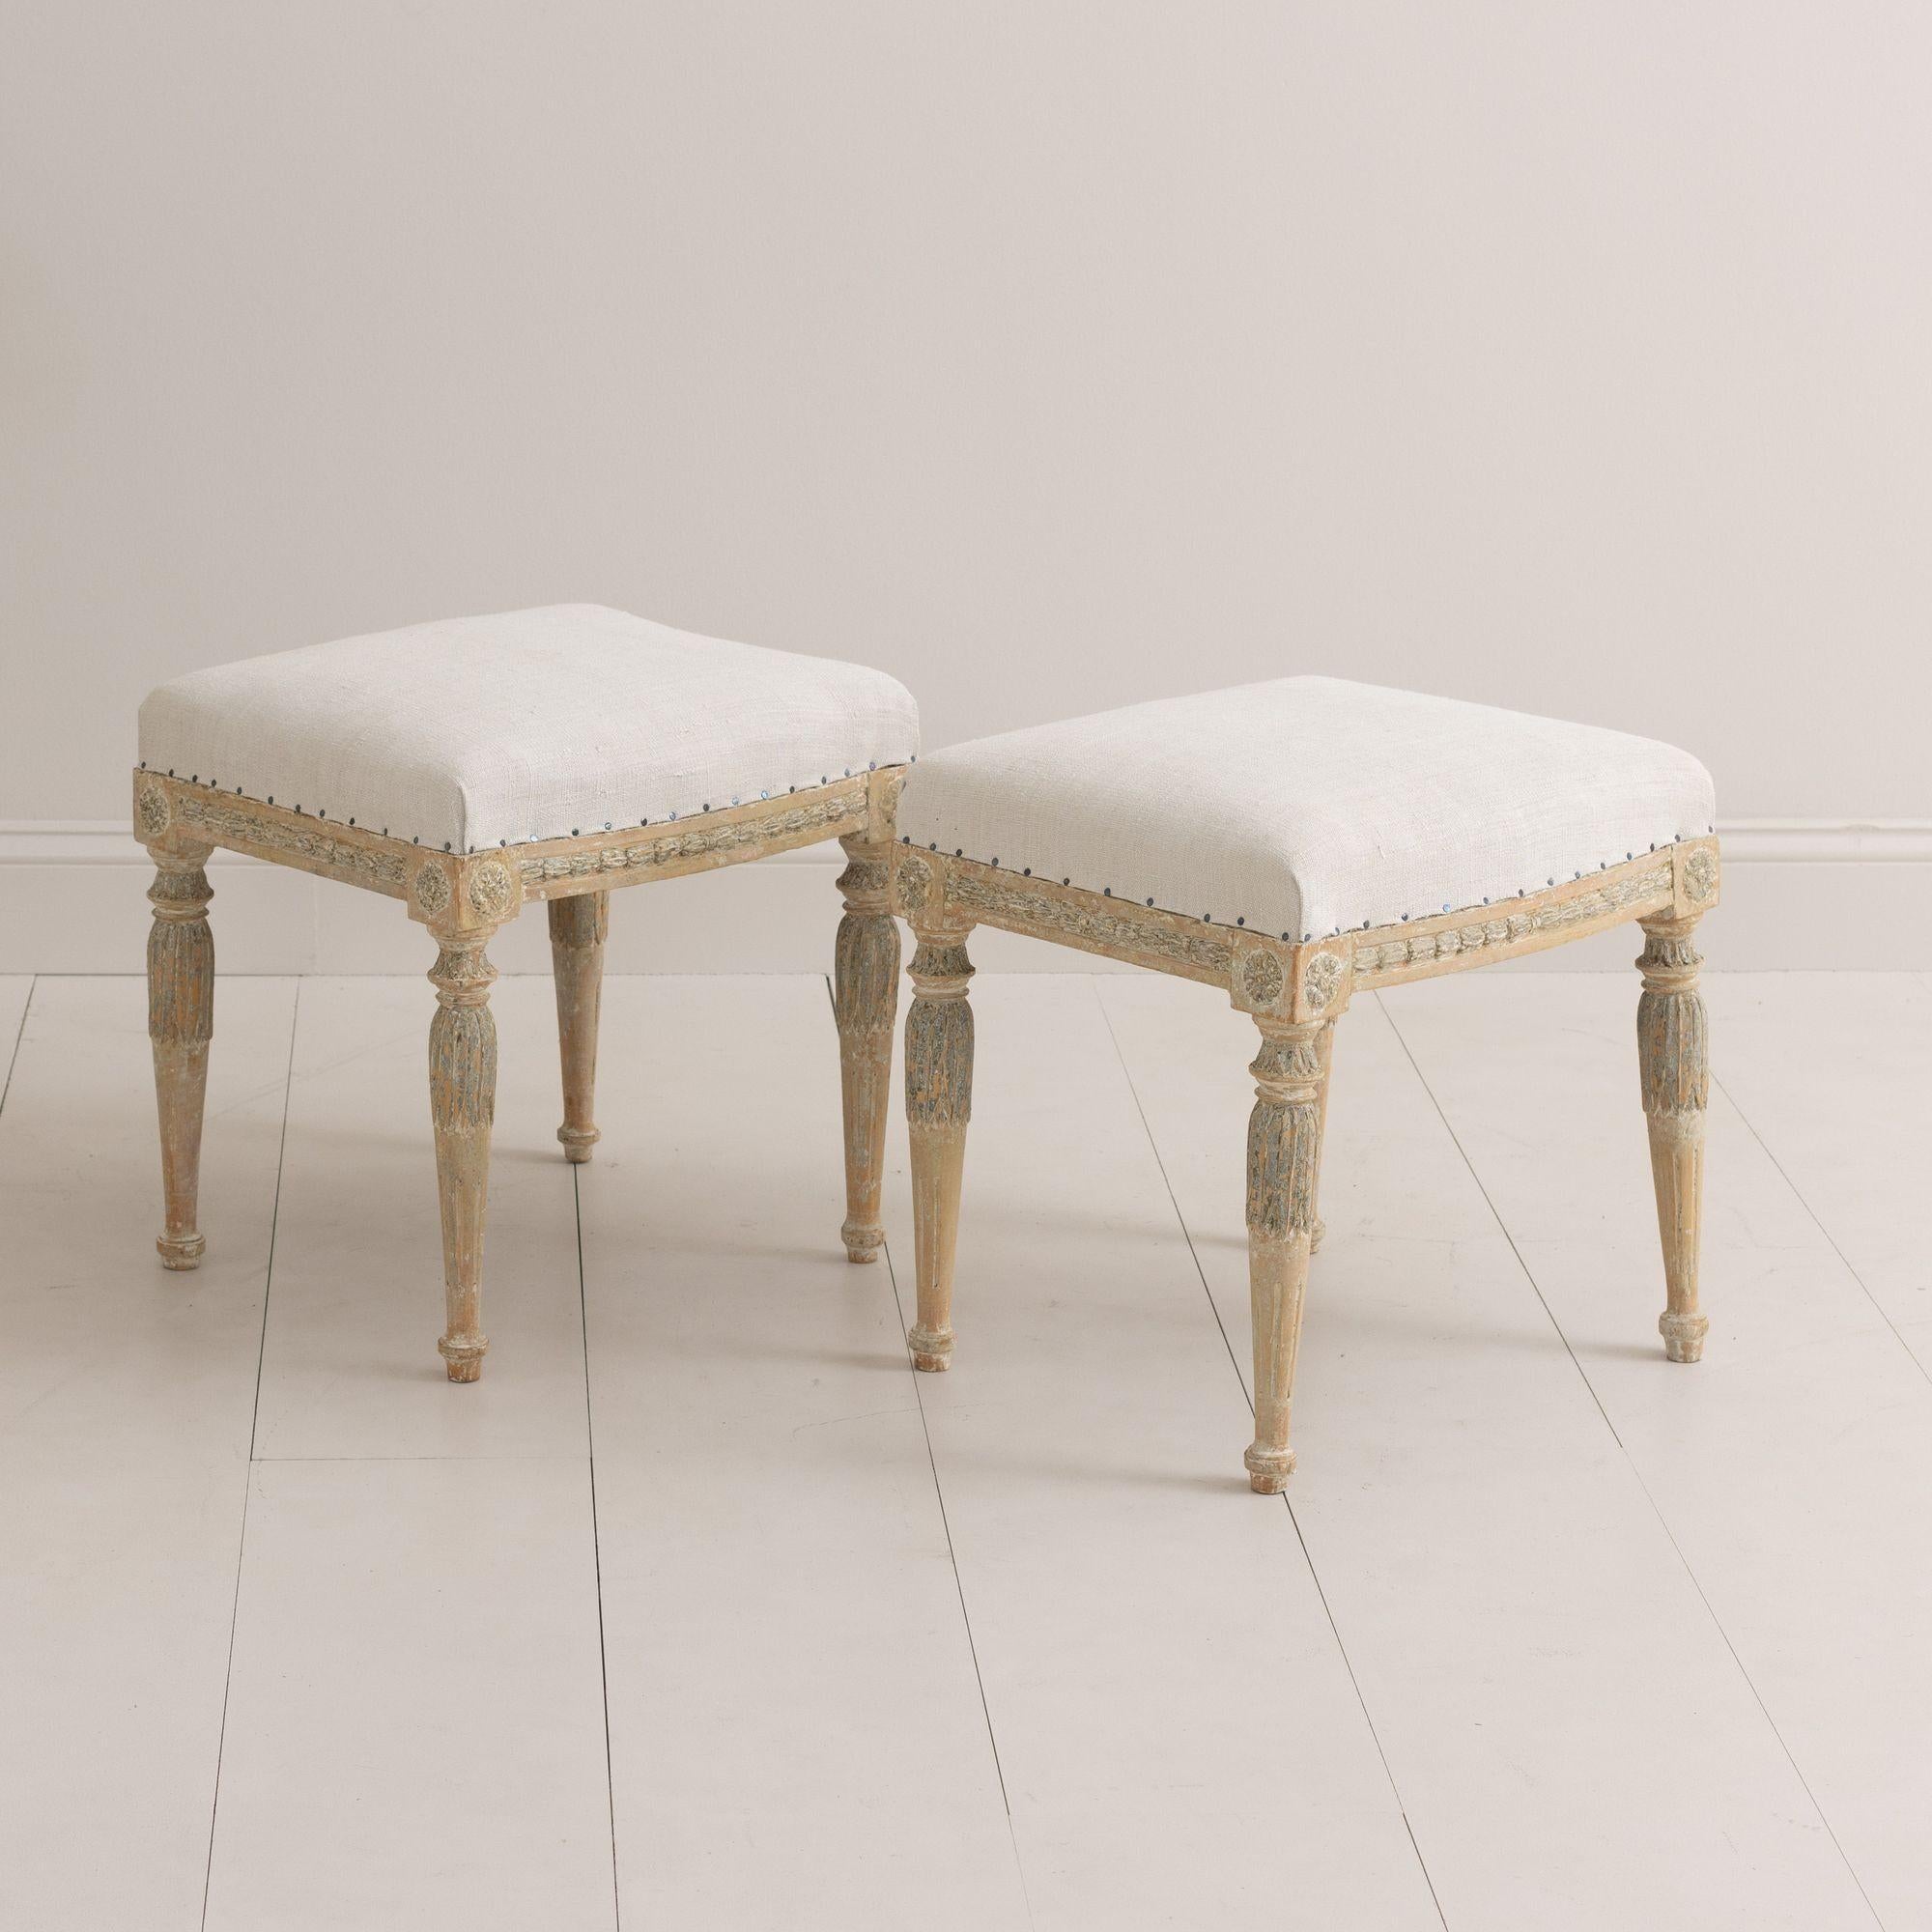 Hand-Carved 18th c. Pair of Swedish Gustavian Stools in Original Paint